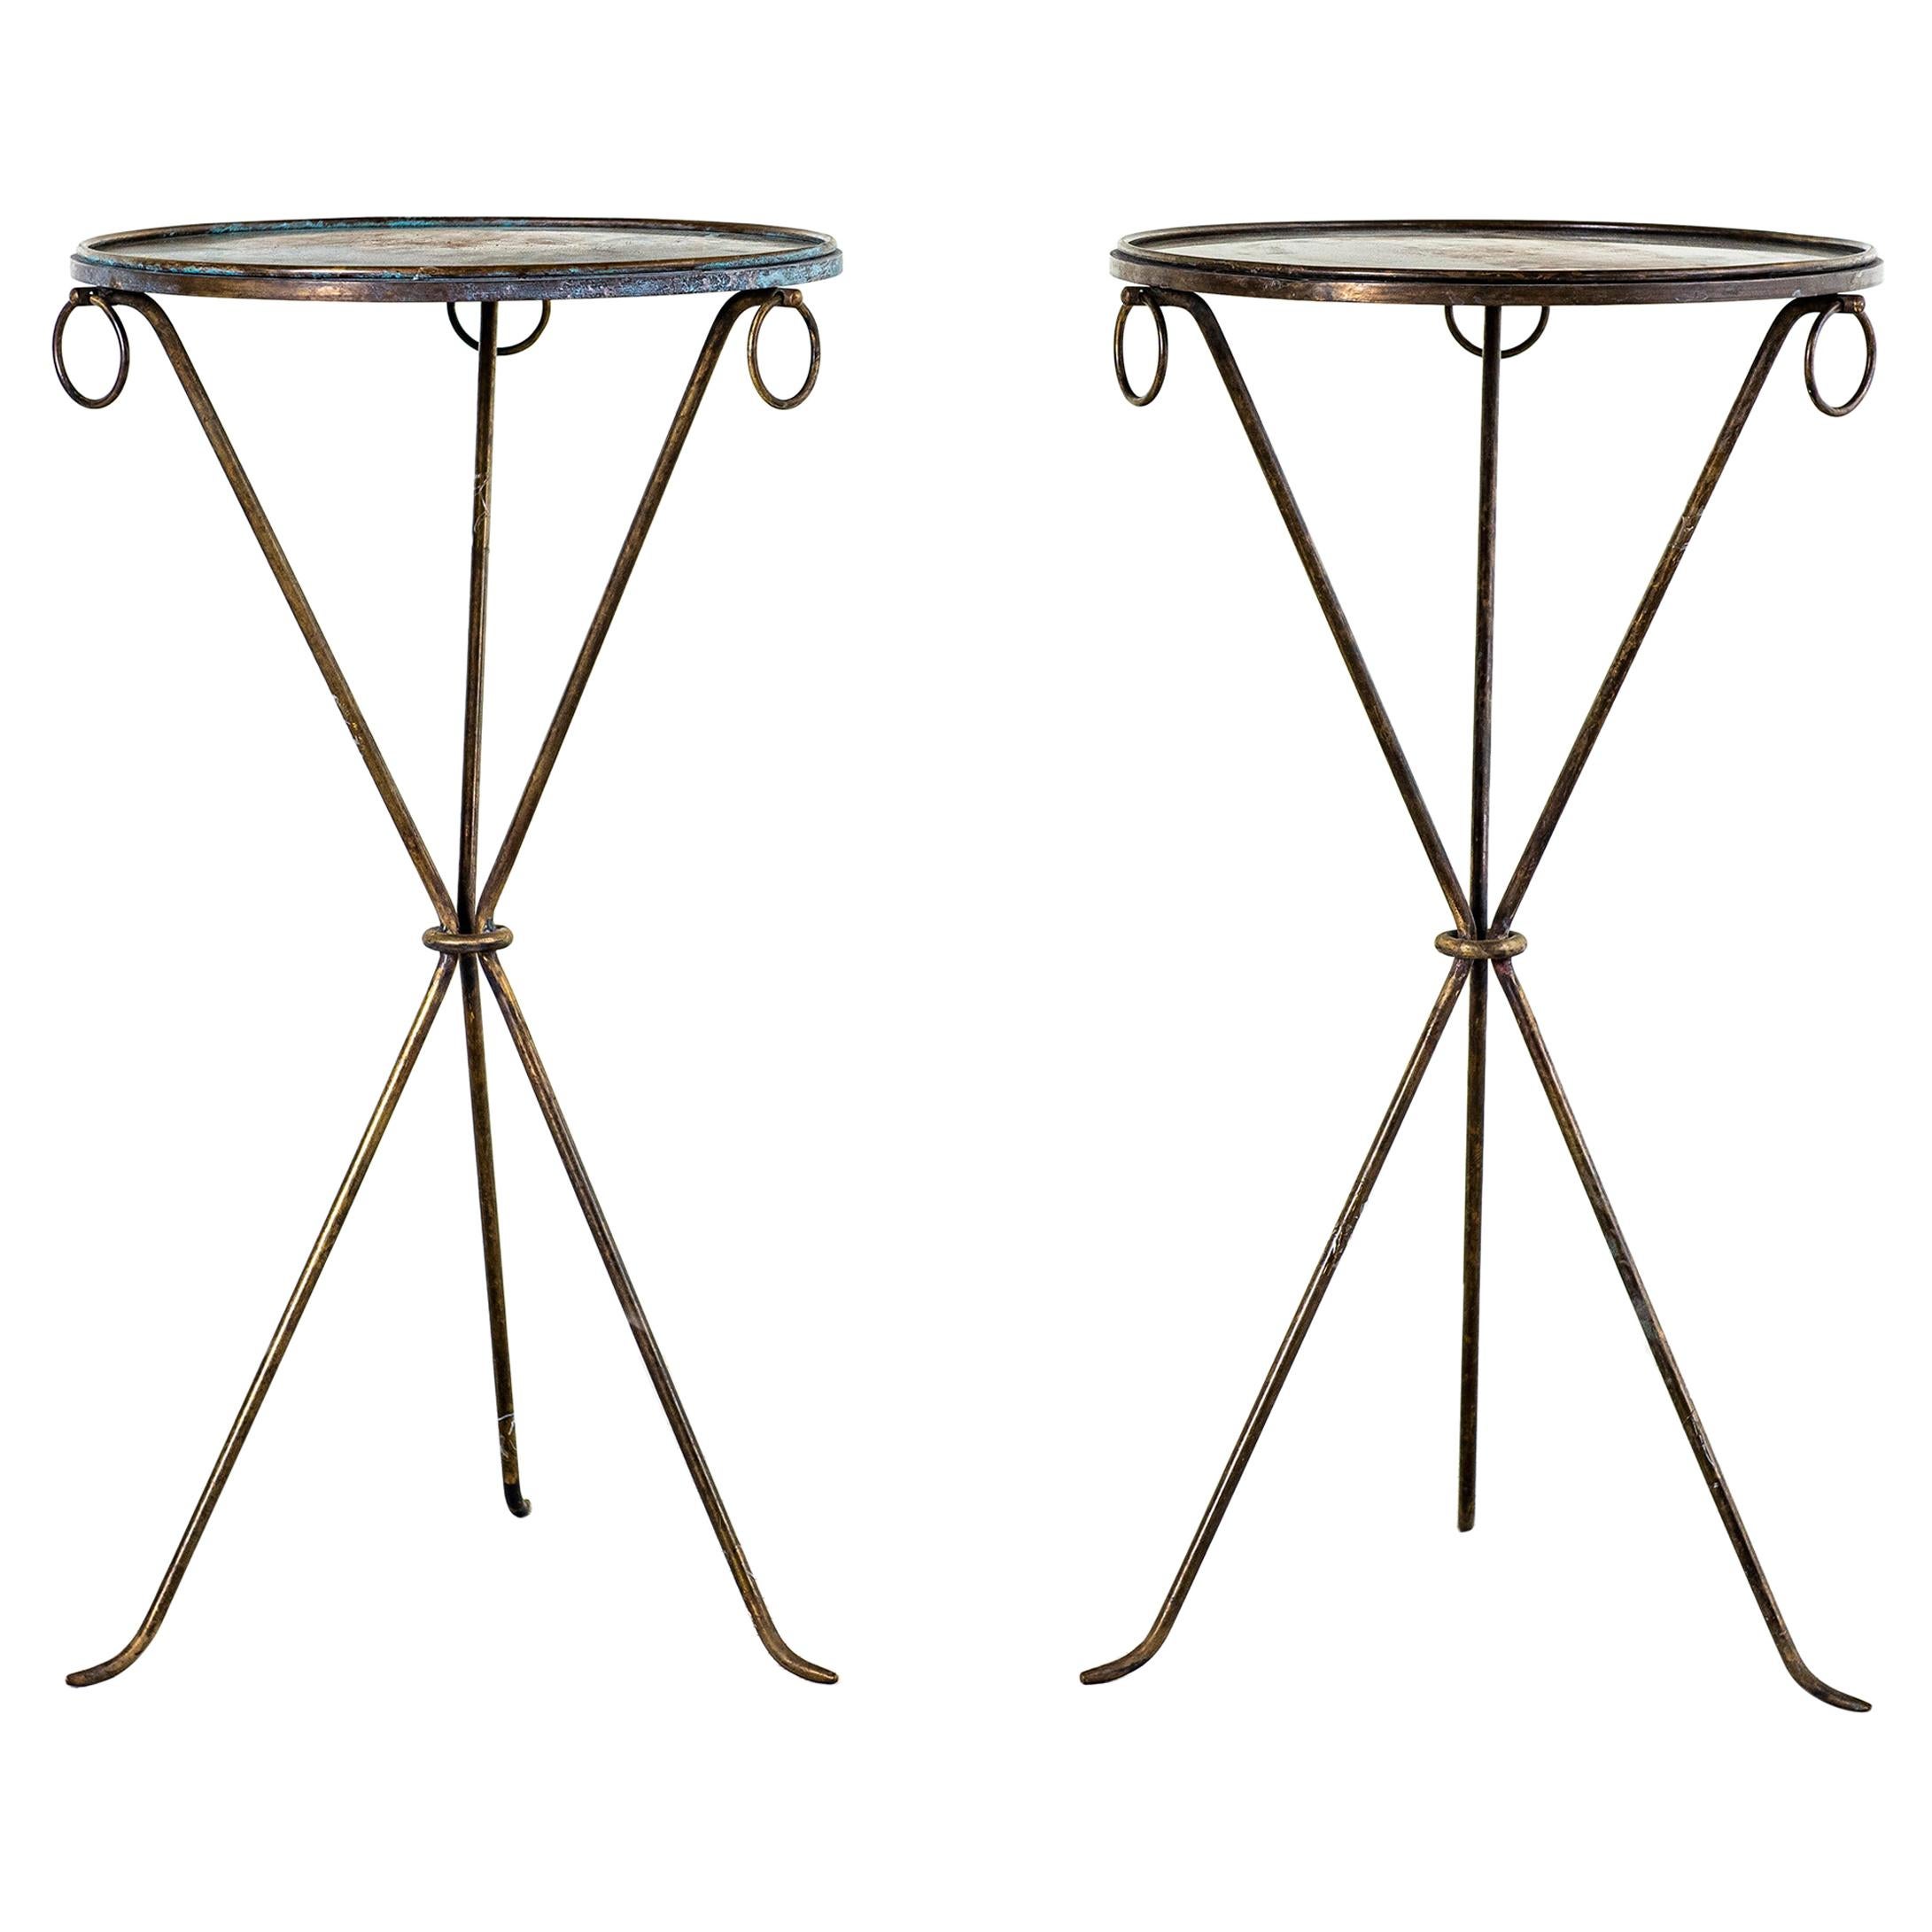 Pair of Guéridons Tables by Jean Michel Frank for Casa Comte, Argentina, 1939